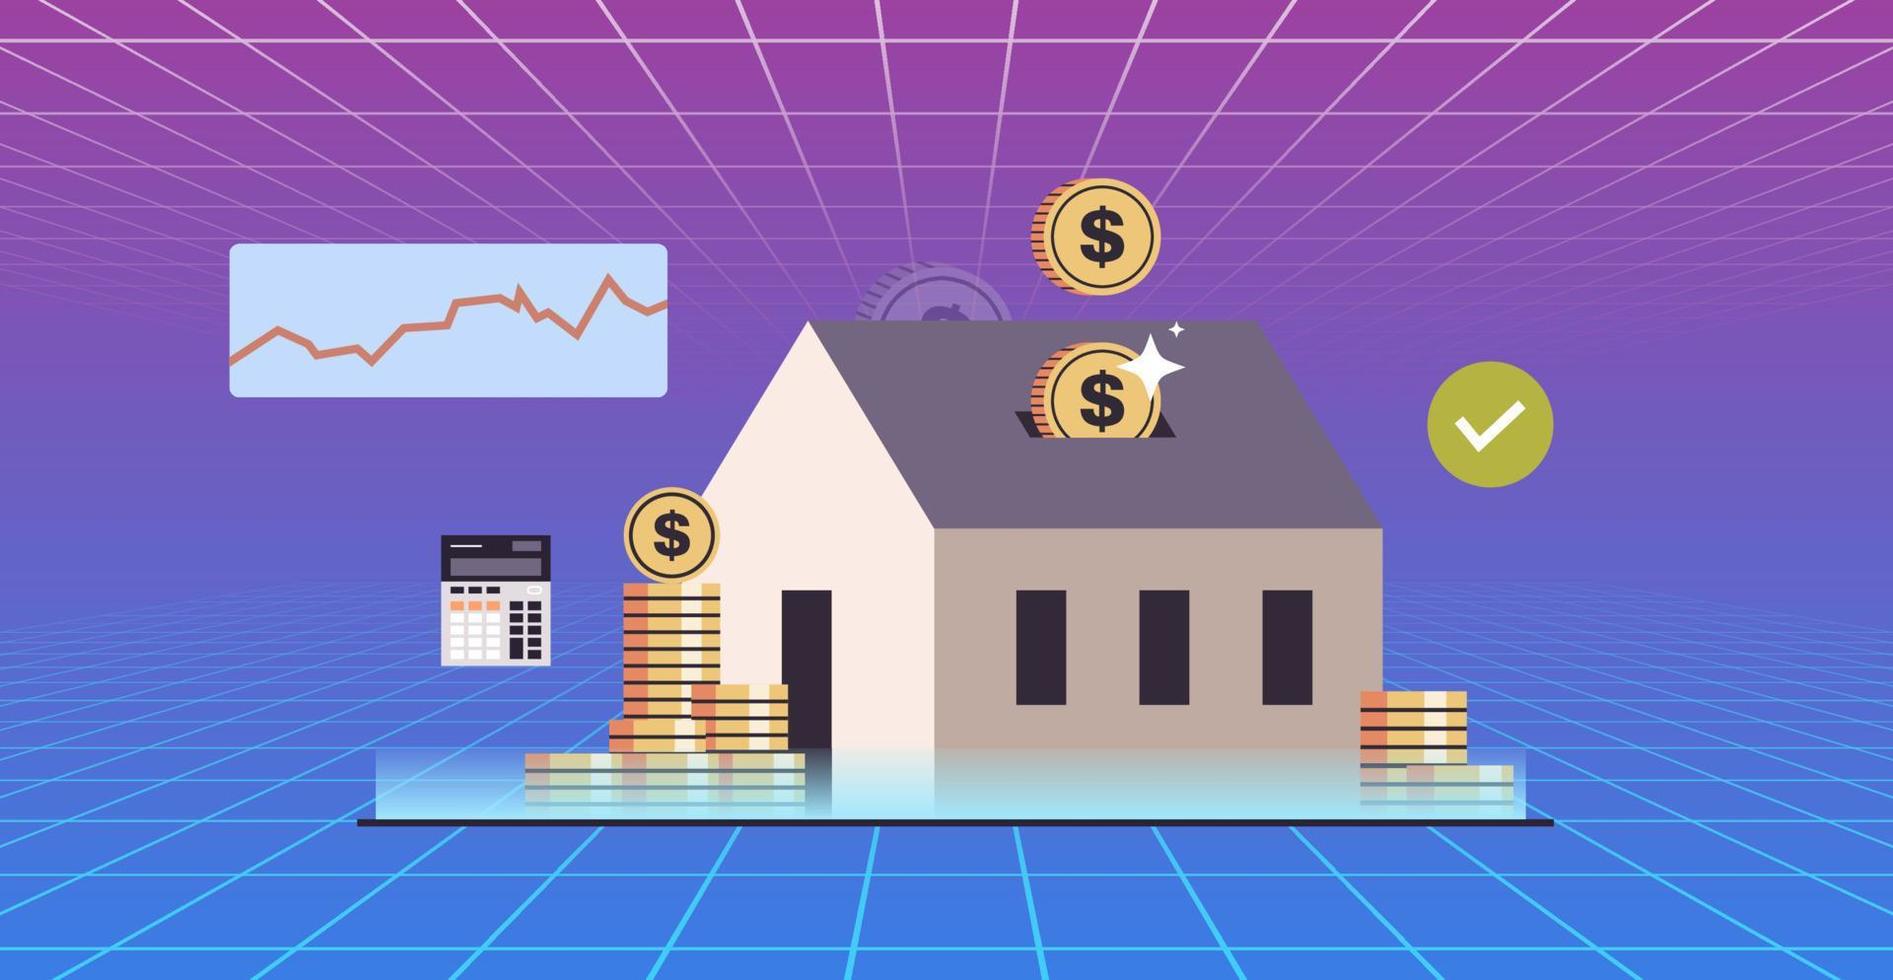 Mortgage and paying credit to bank, real estate property, house loan, rent concept flat vector illustration.